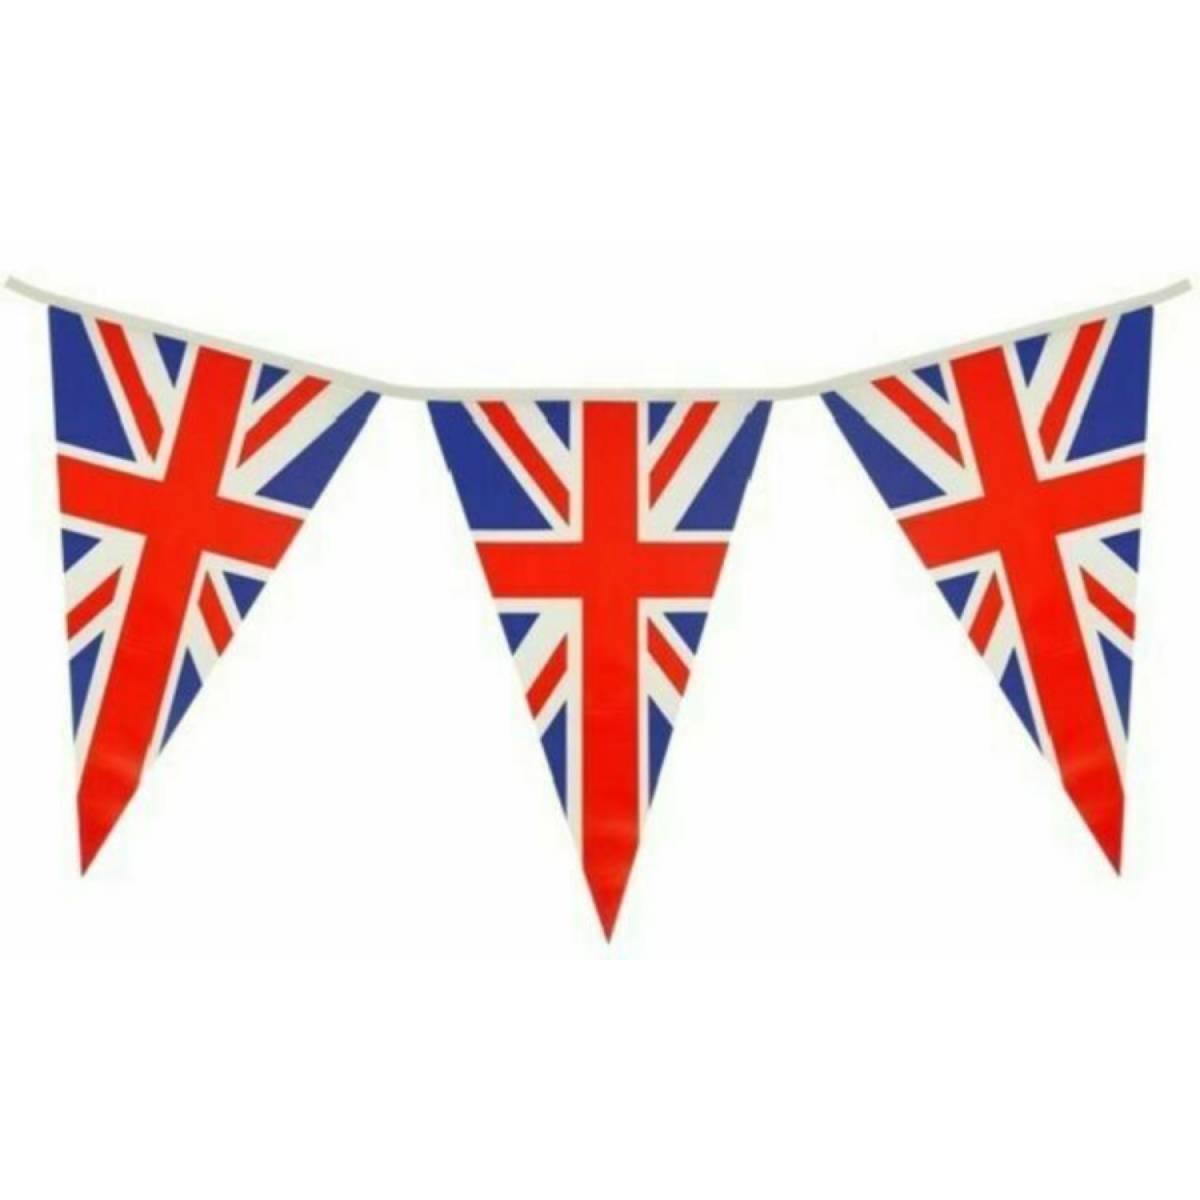 Union Jack Bunting 7m long with 25 Flags by Henbrandt F63003 available here at Karnival Costumes online party shop